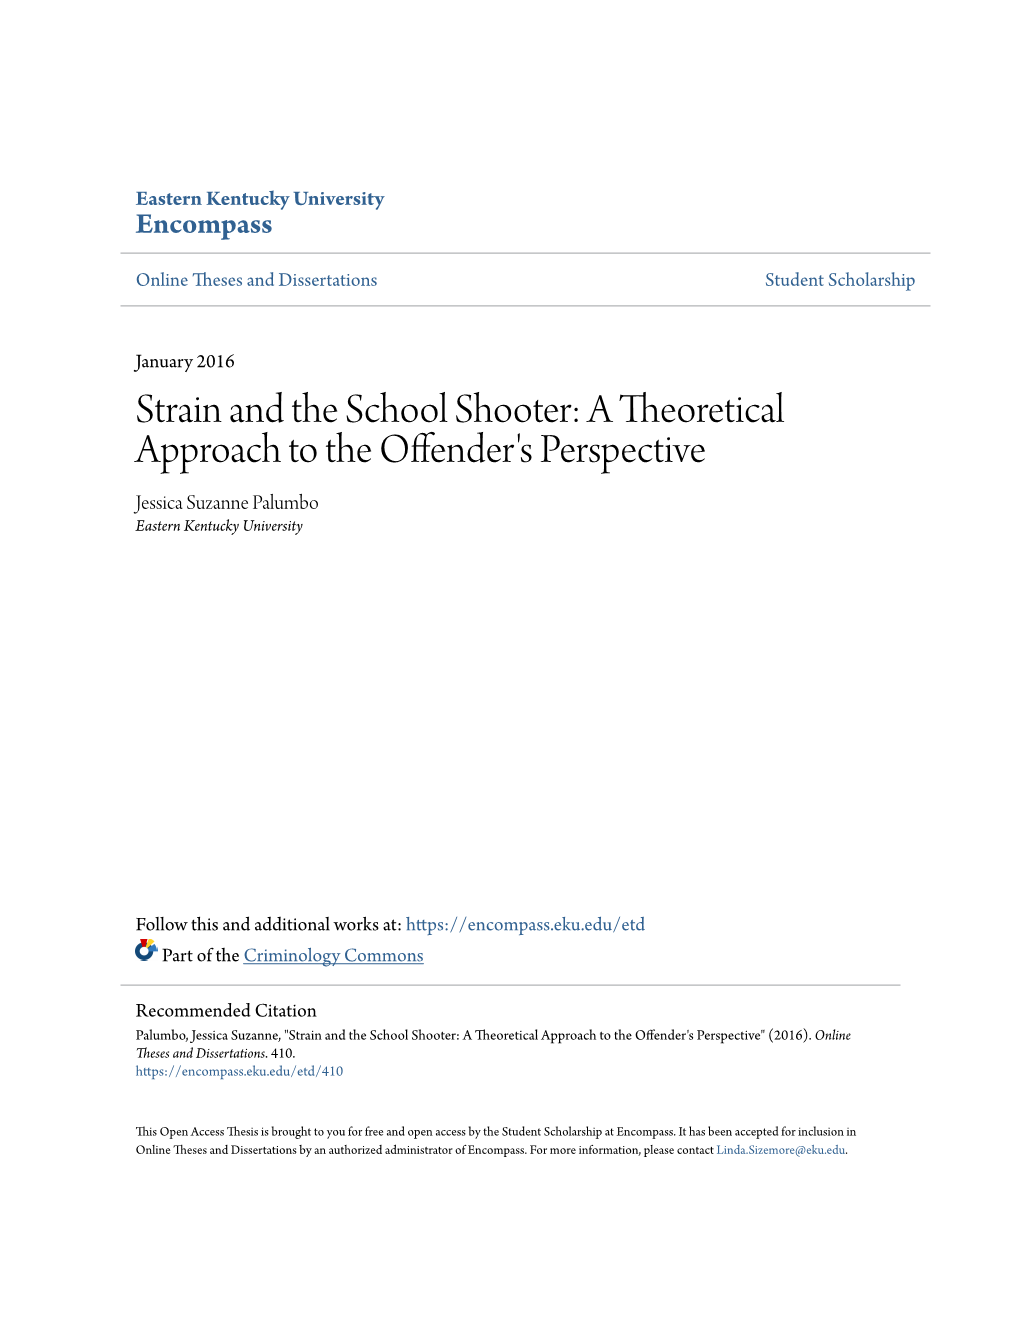 Strain and the School Shooter: a Theoretical Approach to the Offender's Perspective Jessica Suzanne Palumbo Eastern Kentucky University